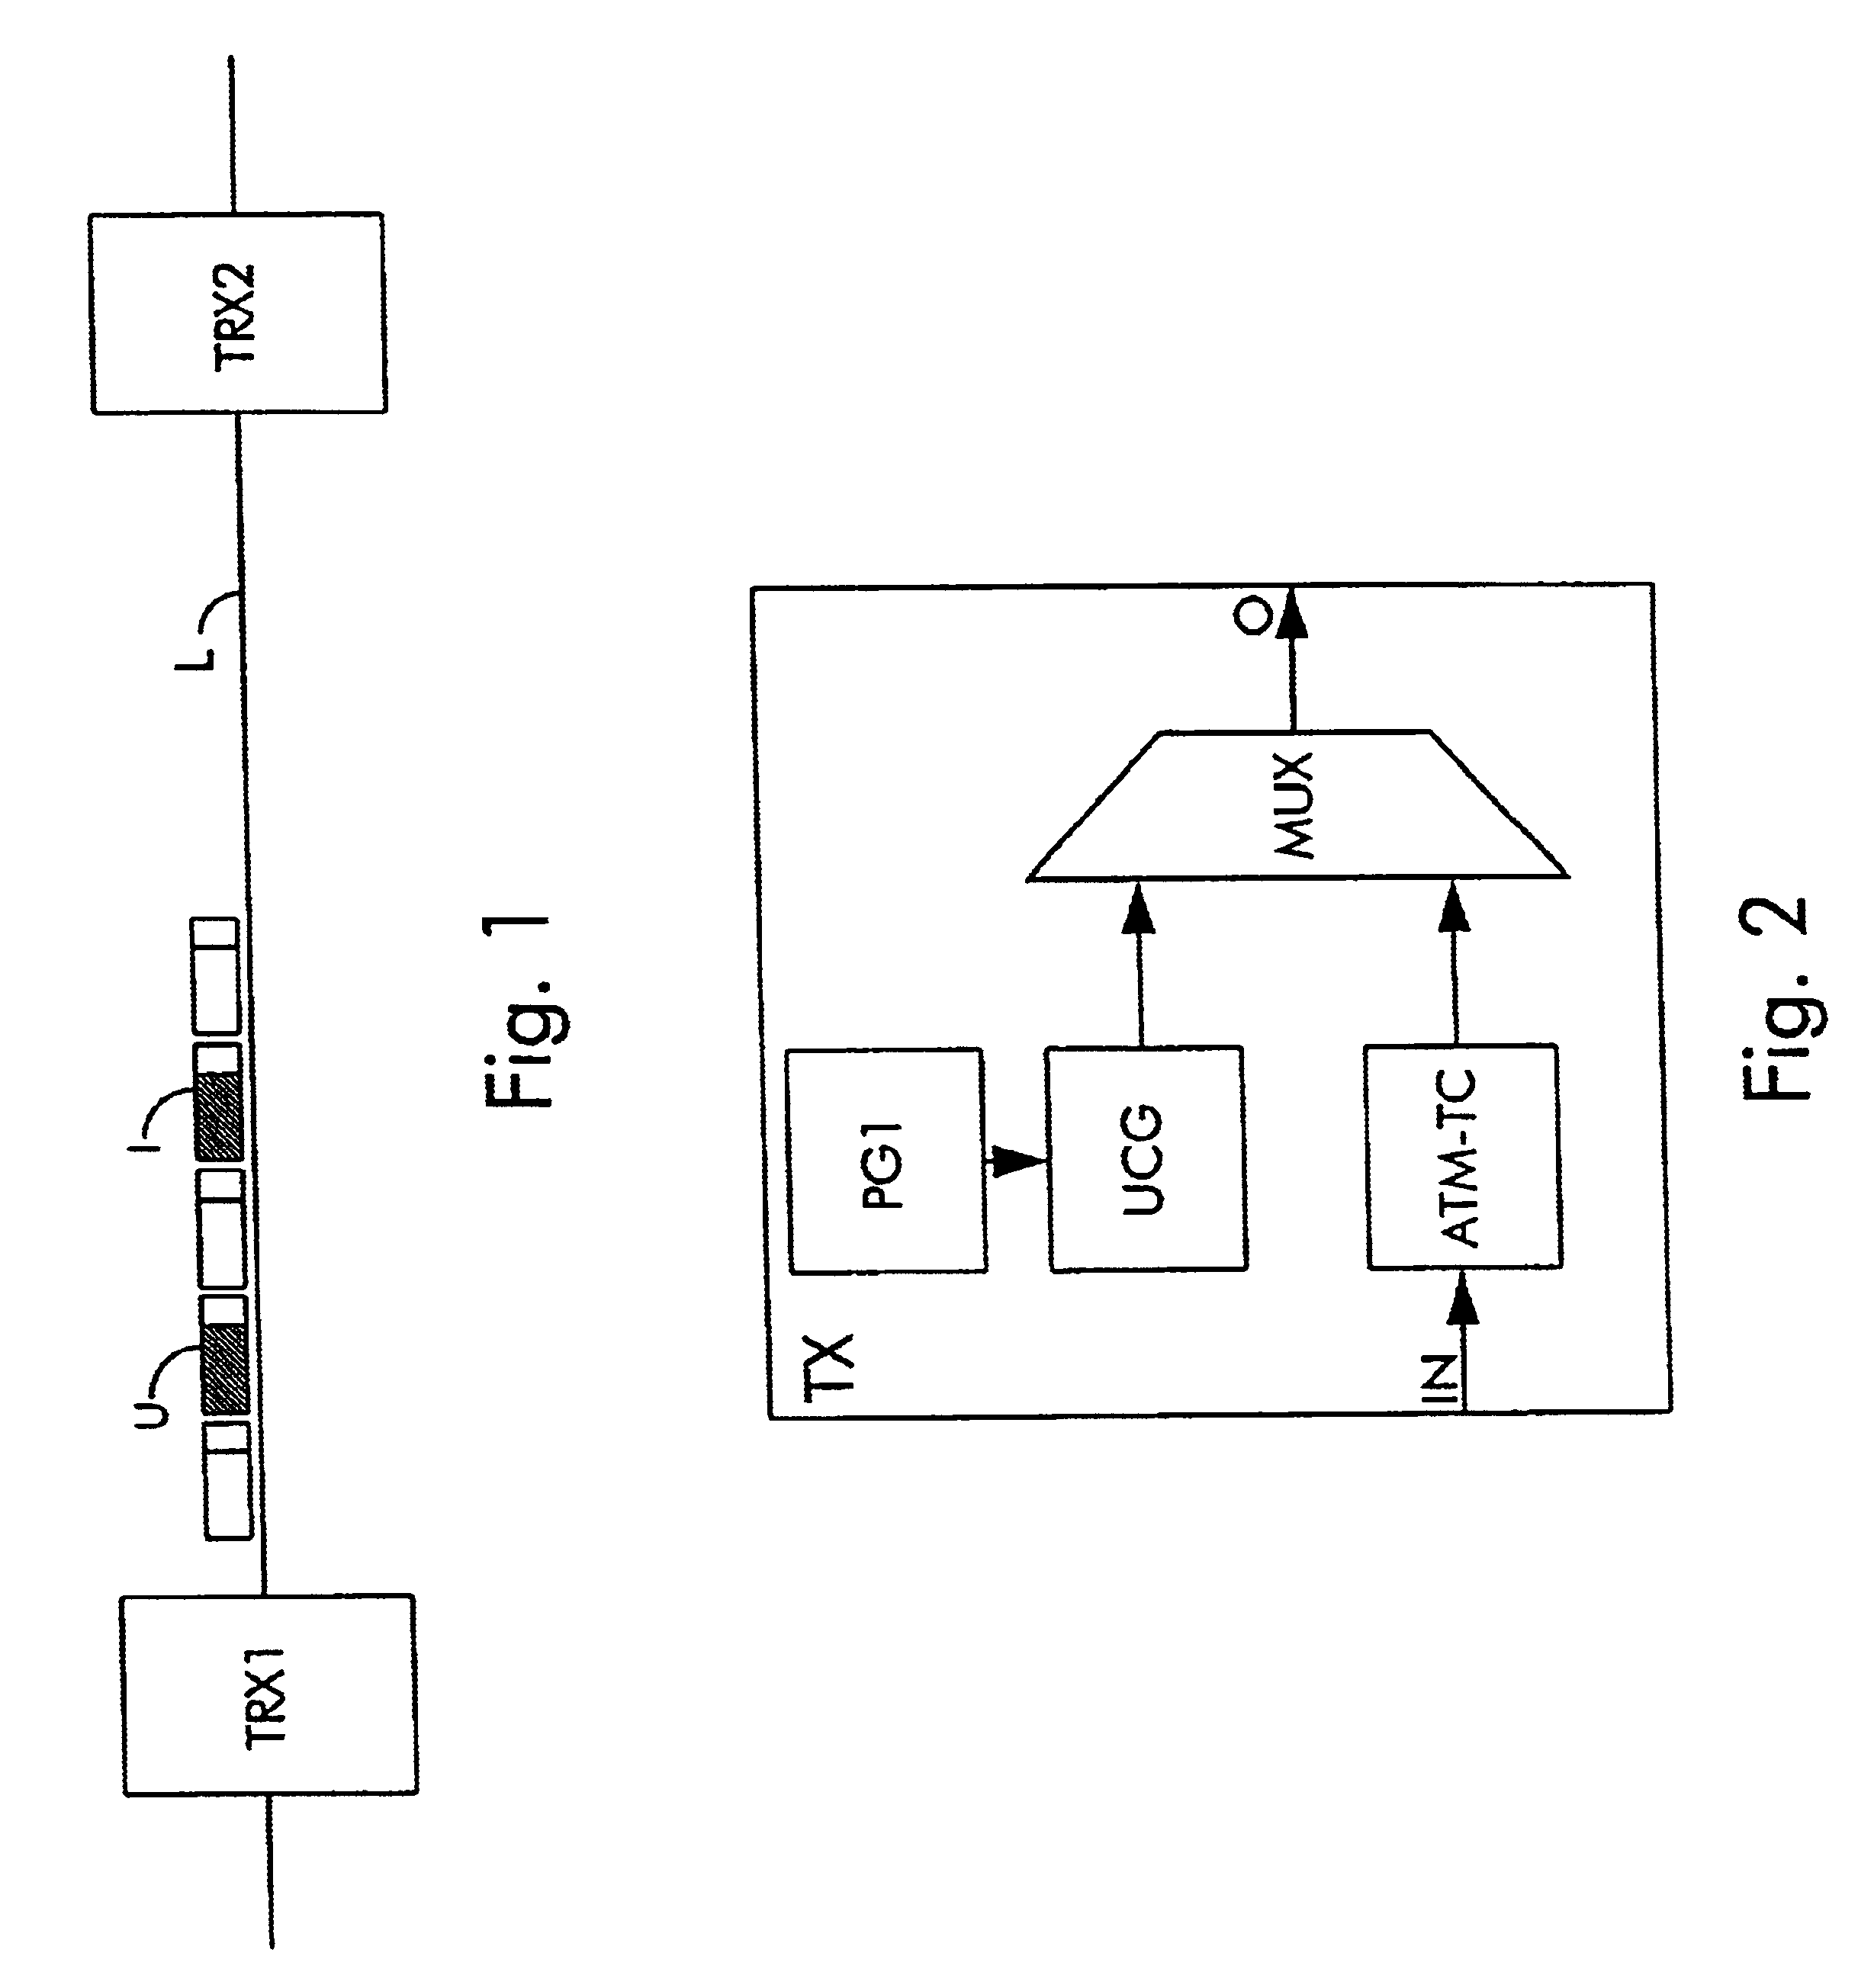 Method for bit error rate measurements in a cell-based telecommunication system